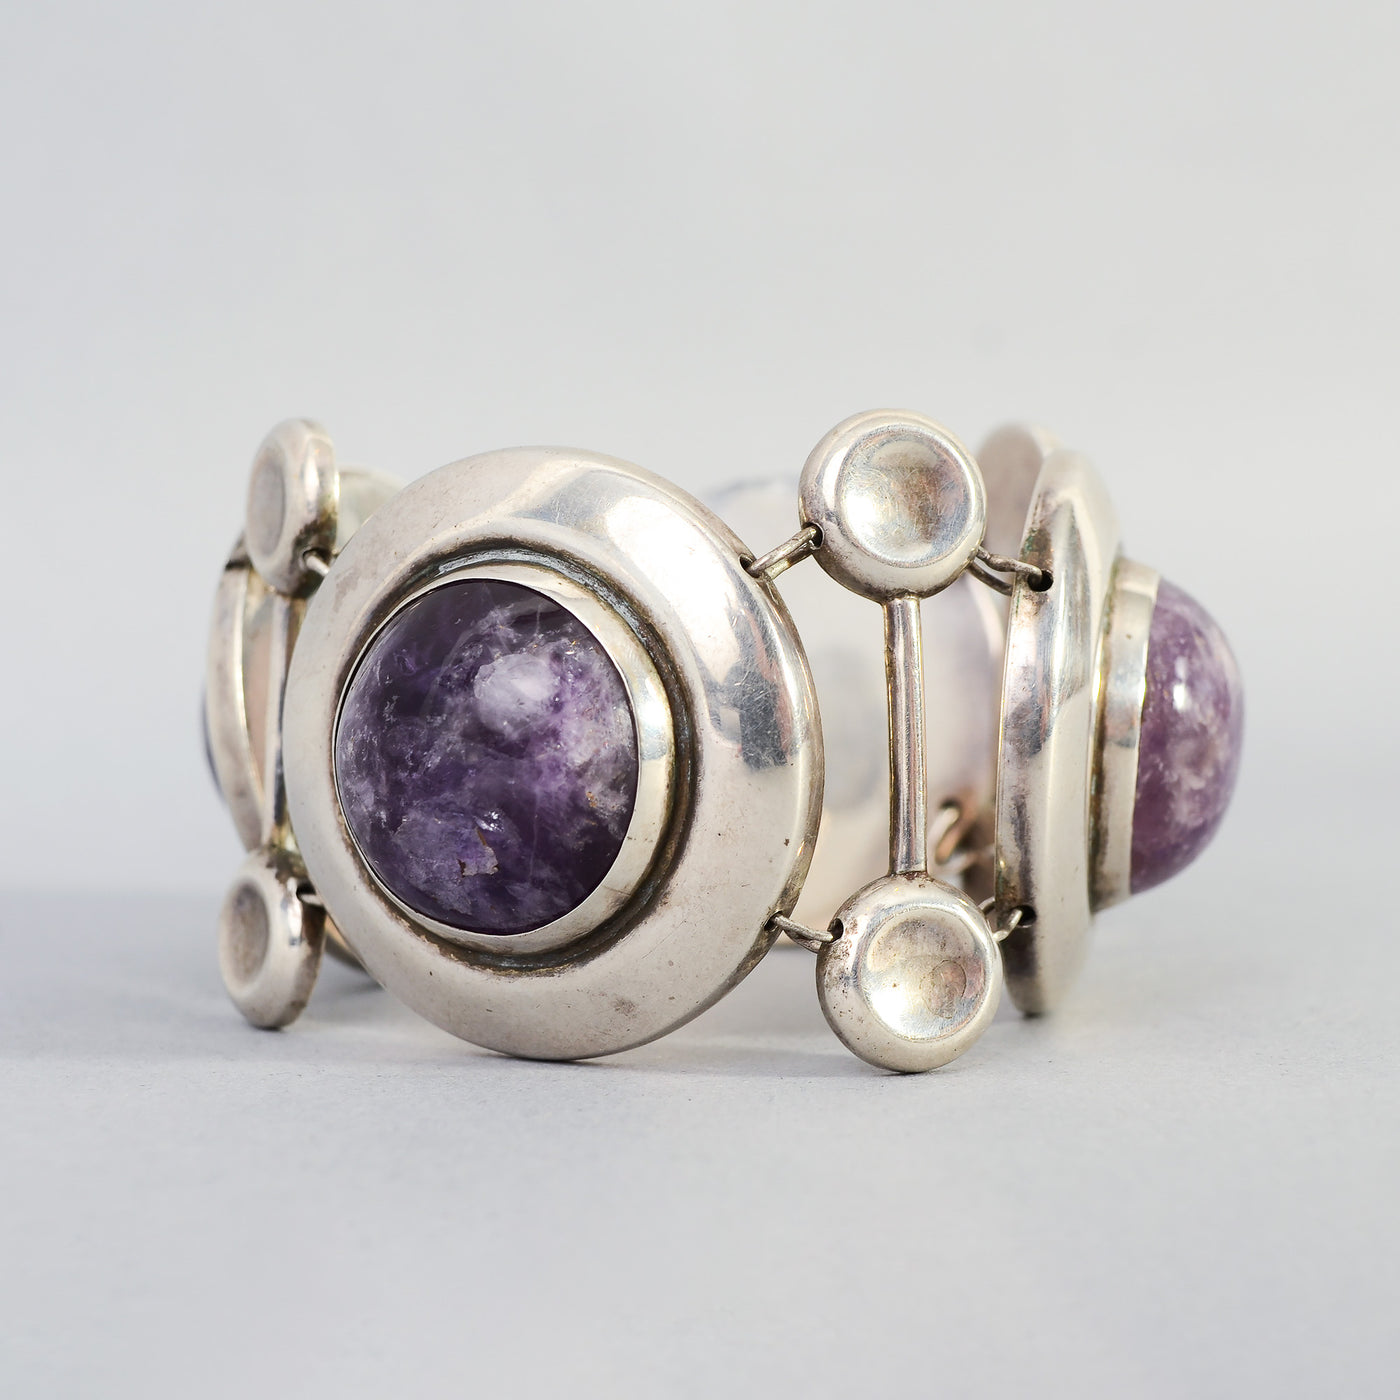 Silver and Amethyst bracelet by Fred Davis #1404090